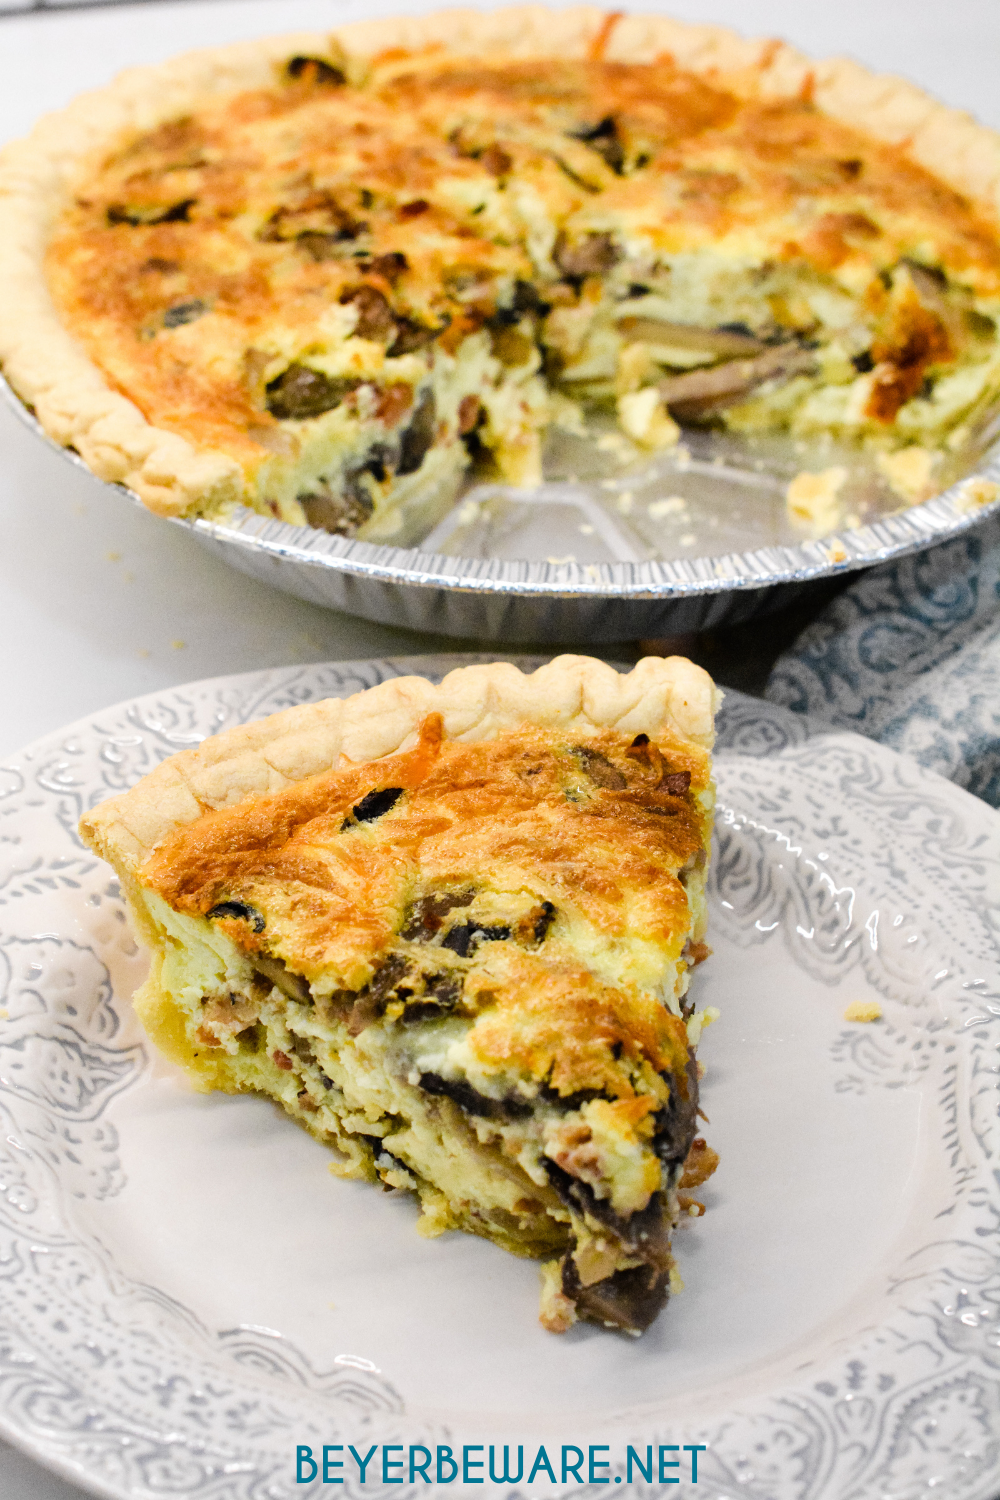 Bacon and mushroom quiche is an easy quiche recipe filled with crispy fried bacon pieces, hearty mushrooms, and lots of cheese.